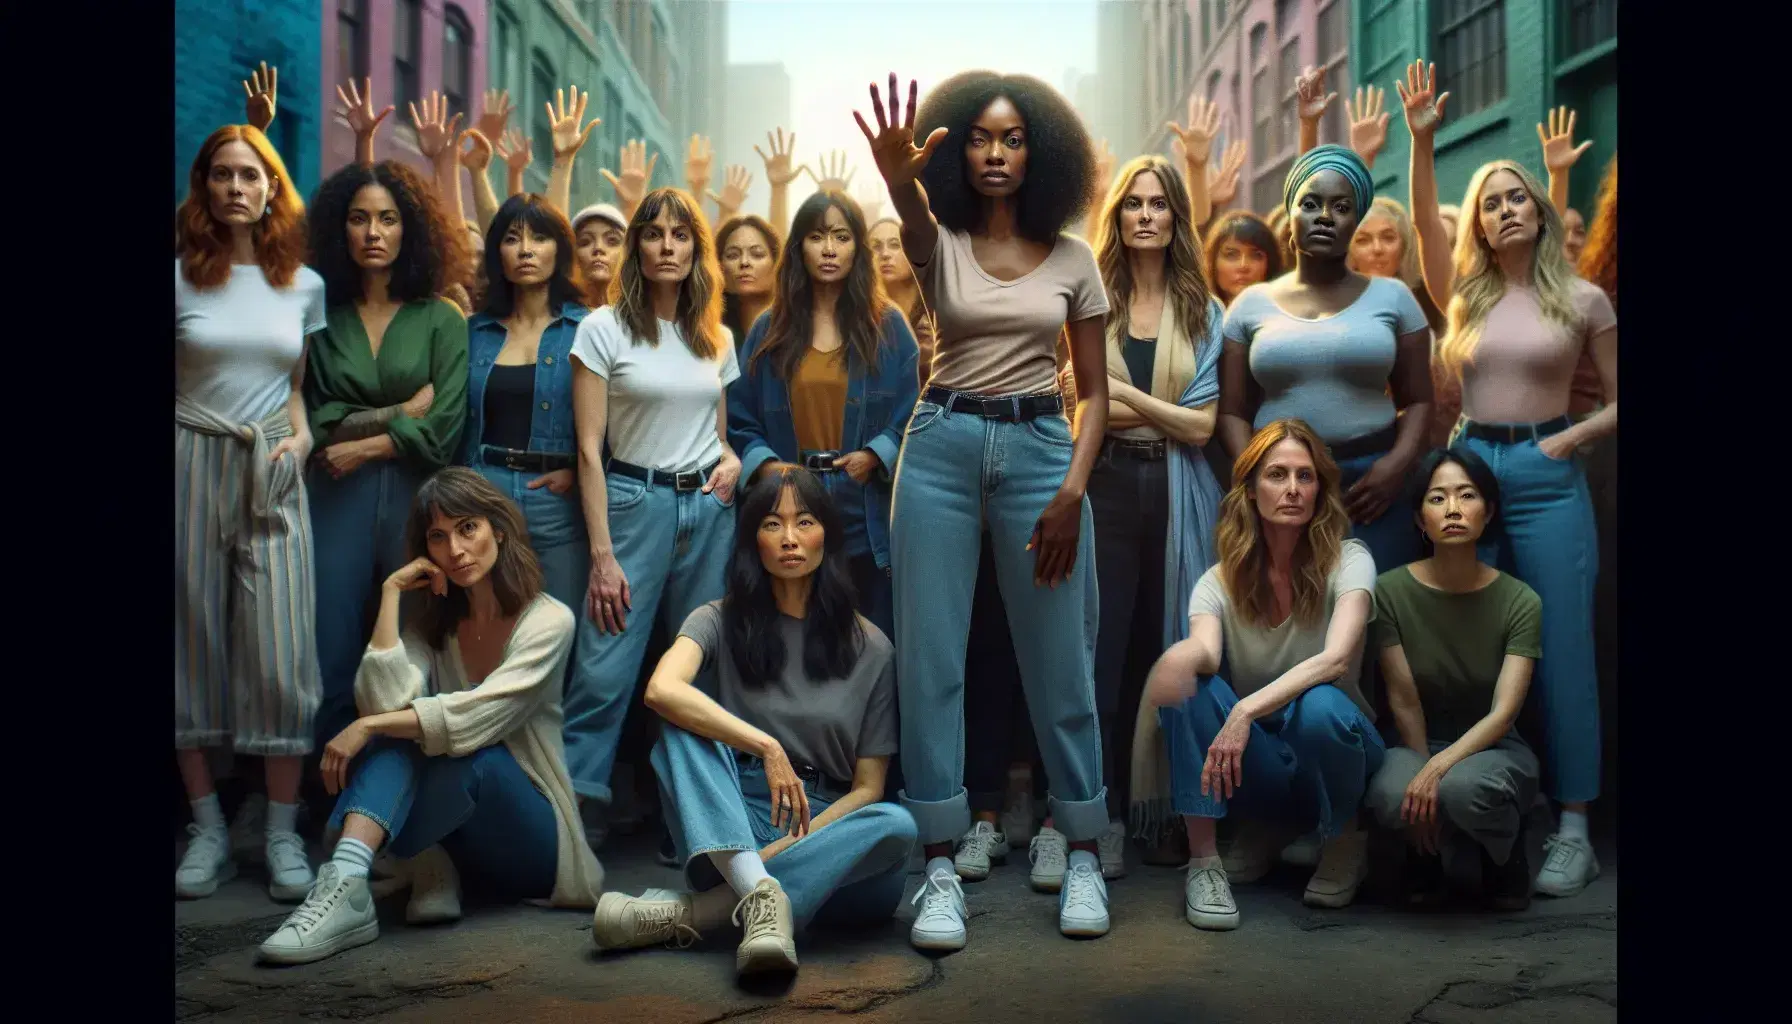 Diverse group of women standing together in solidarity, one with hand raised, wearing casual attire against a blurred urban backdrop, exuding confidence.